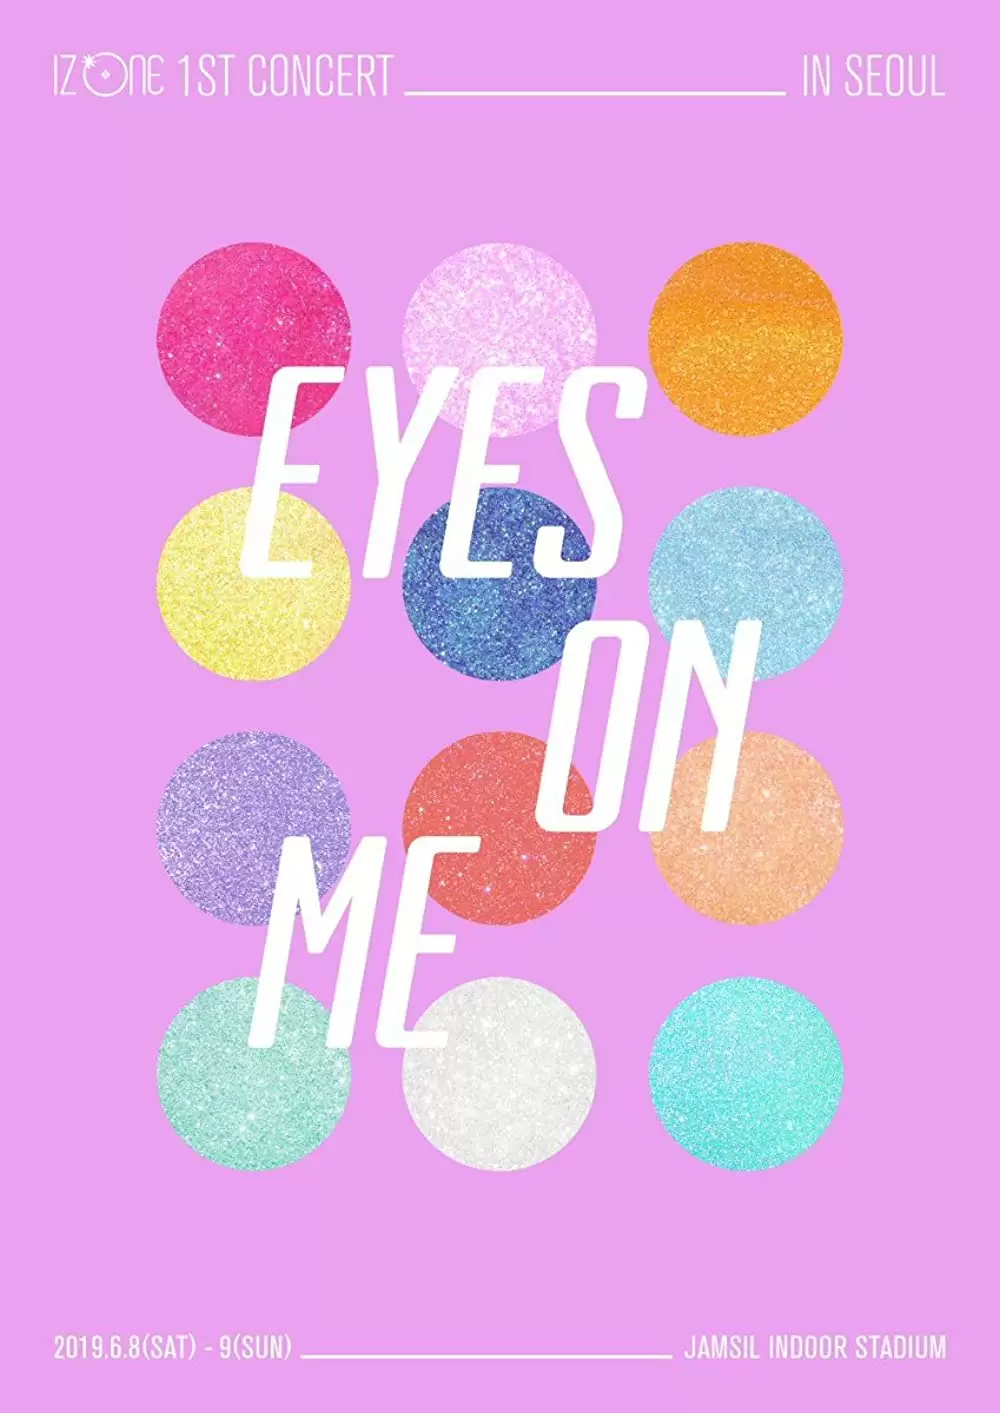 「EYES ON ME : The Movie」の画像